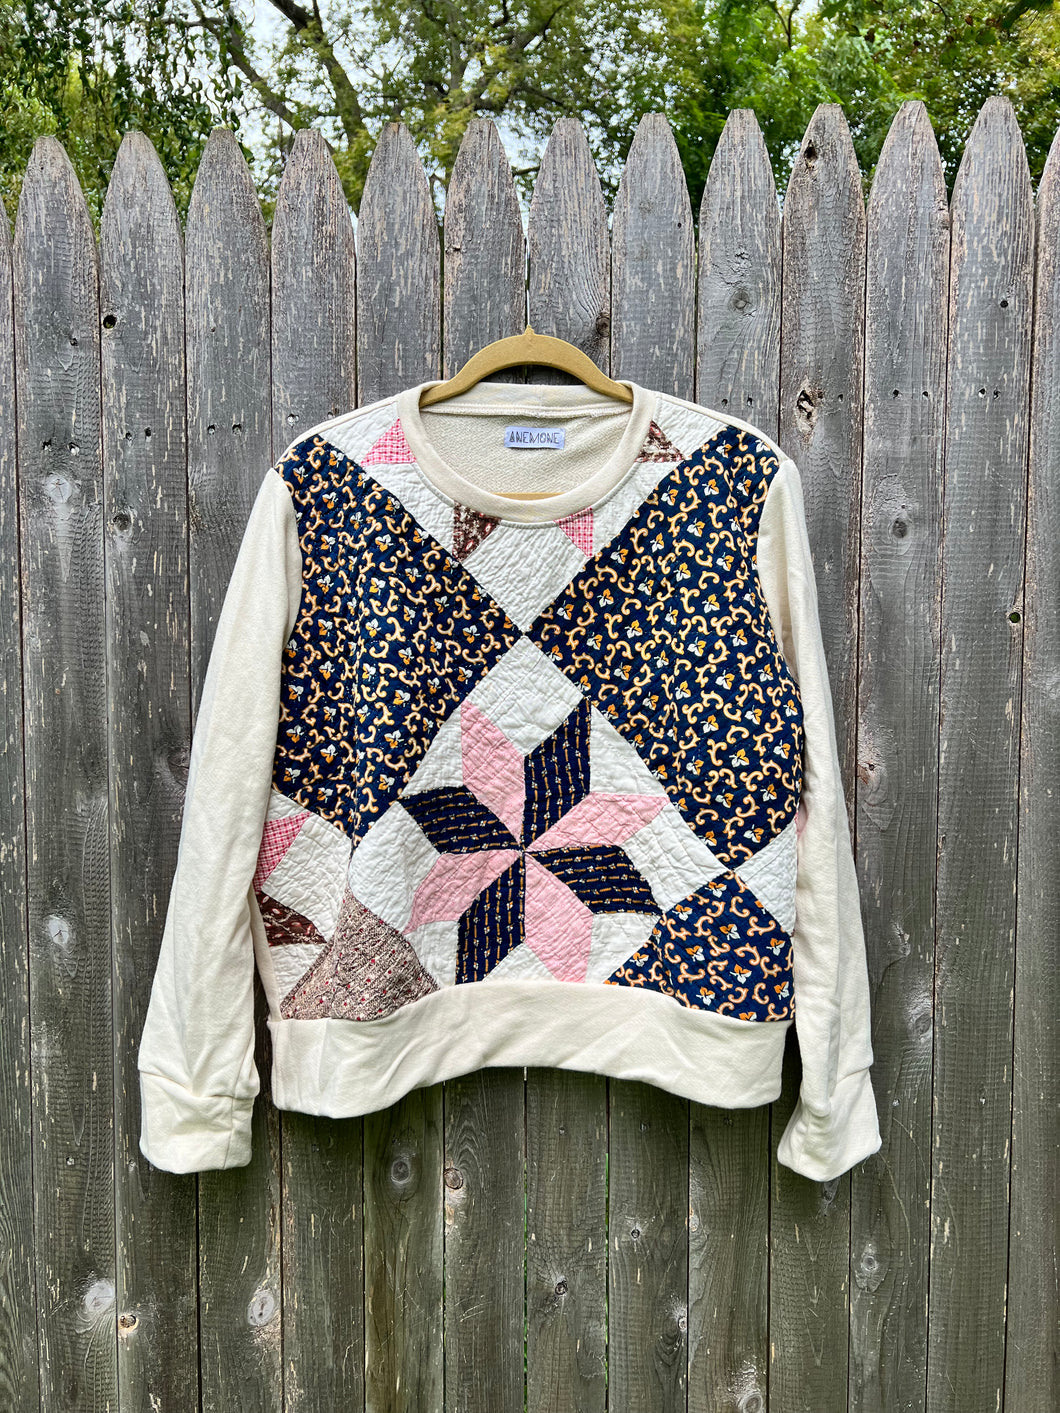 One-of-a-Kind: LeMoyne Star French Terry Pullover (XL)